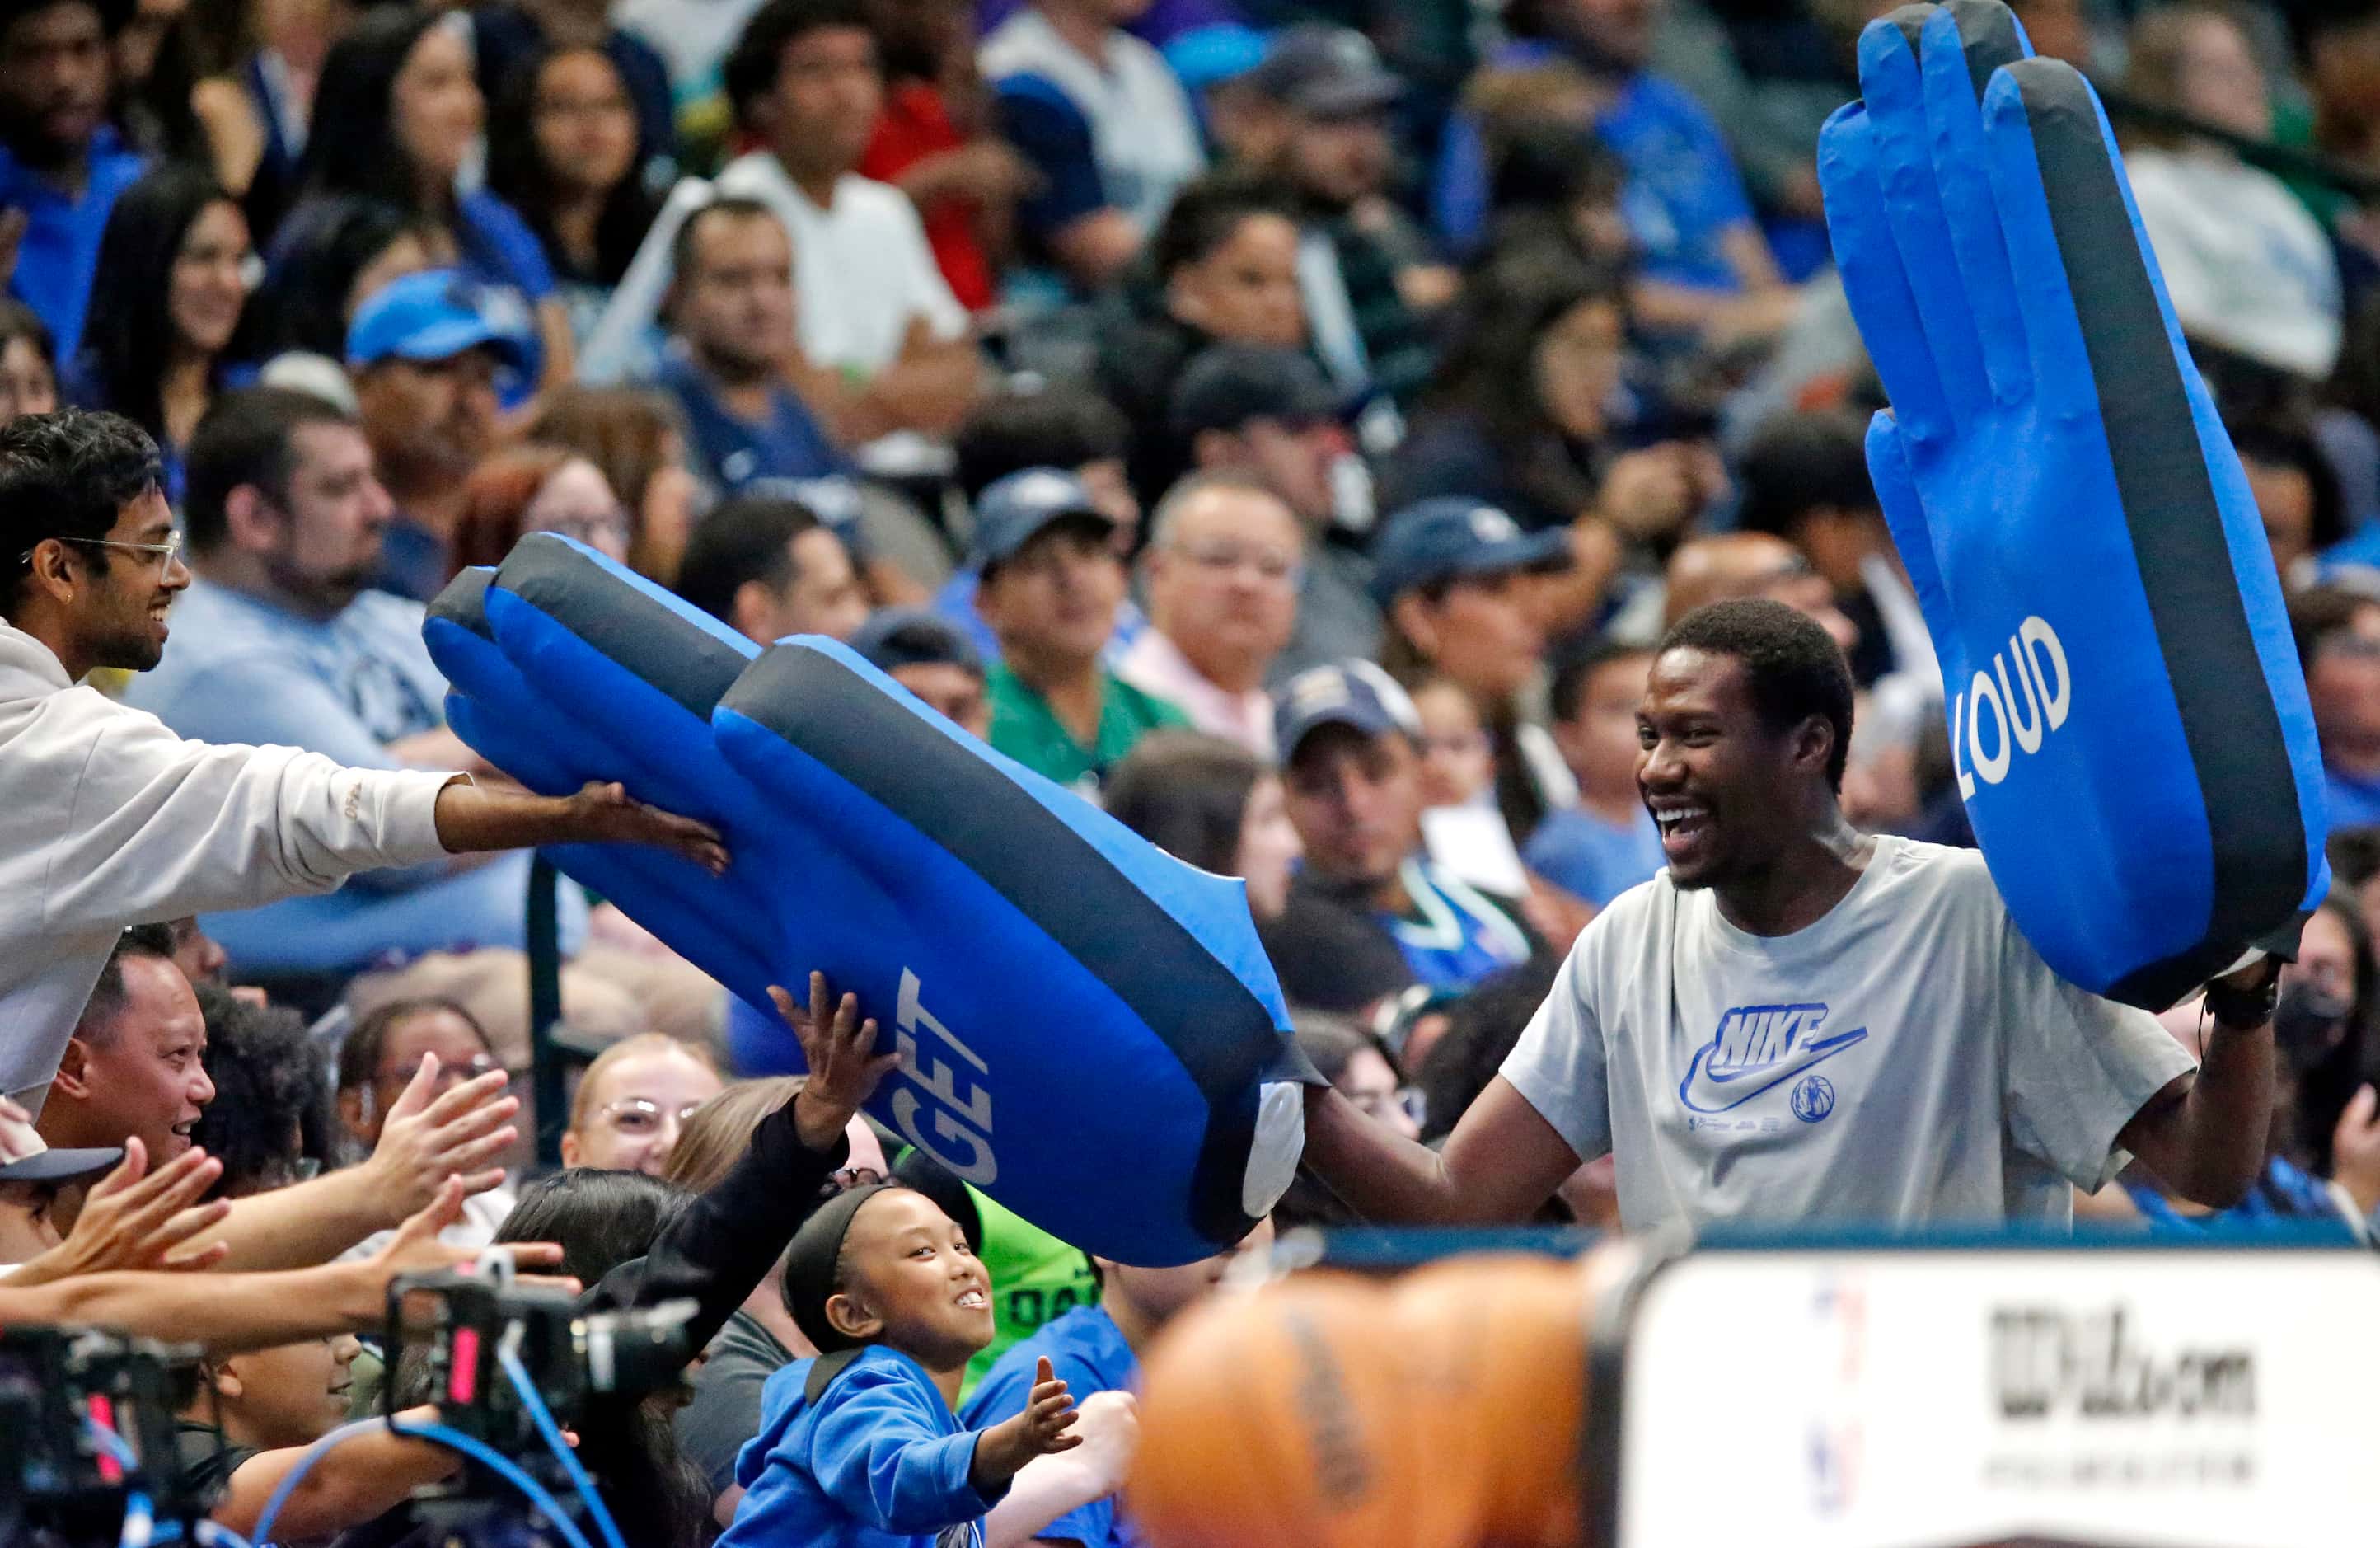 Mavs cheer personel work the crowd before the team takes the court at the Mavs Fan Jam, a...